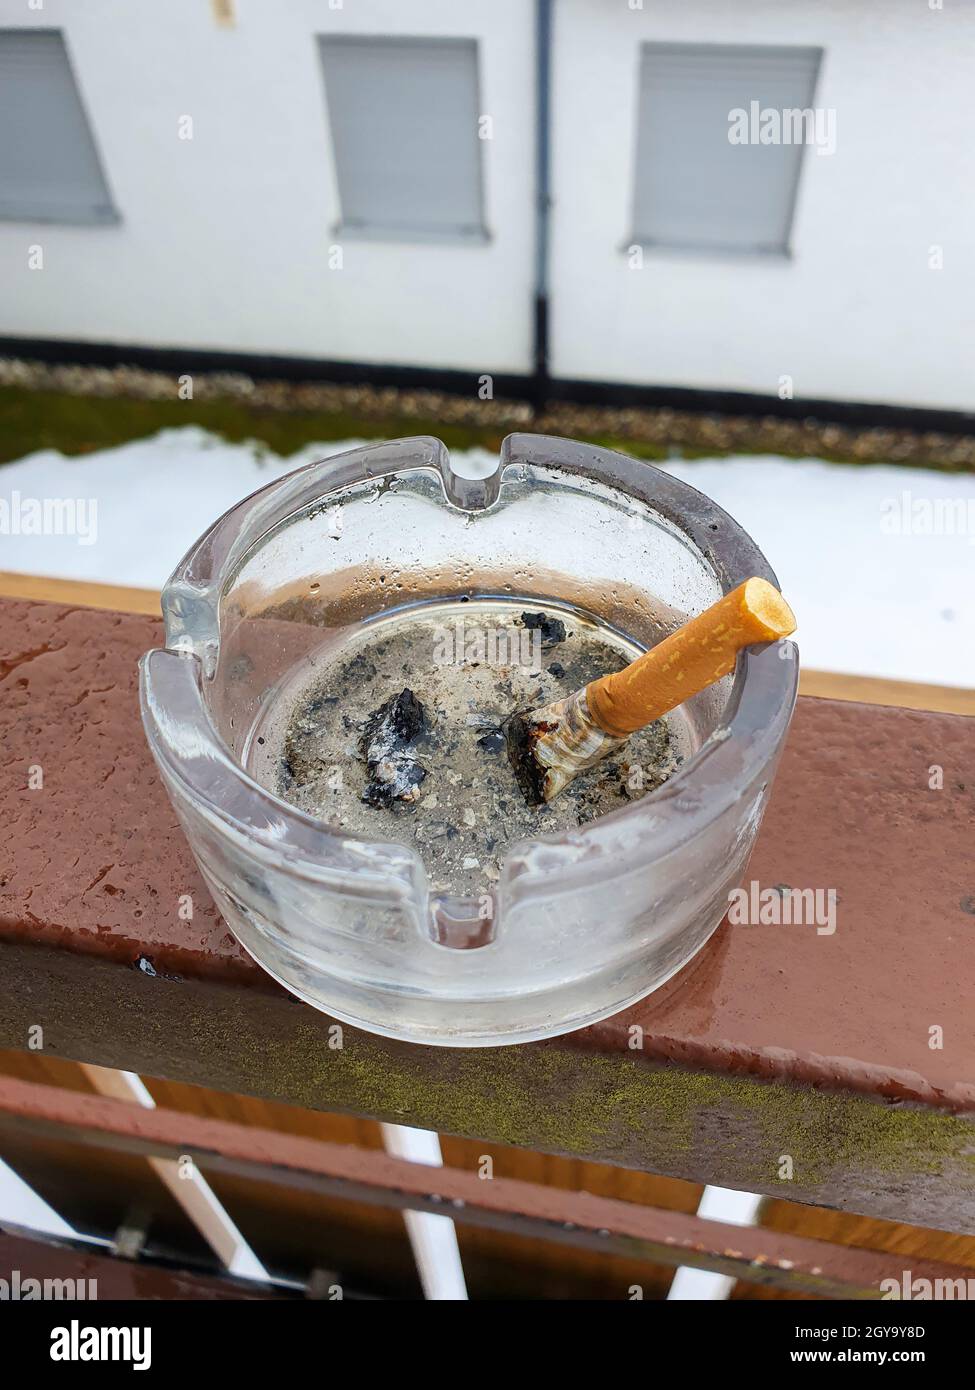 A stubbed out cigarette in an ashtray outside on the balcony. Stop